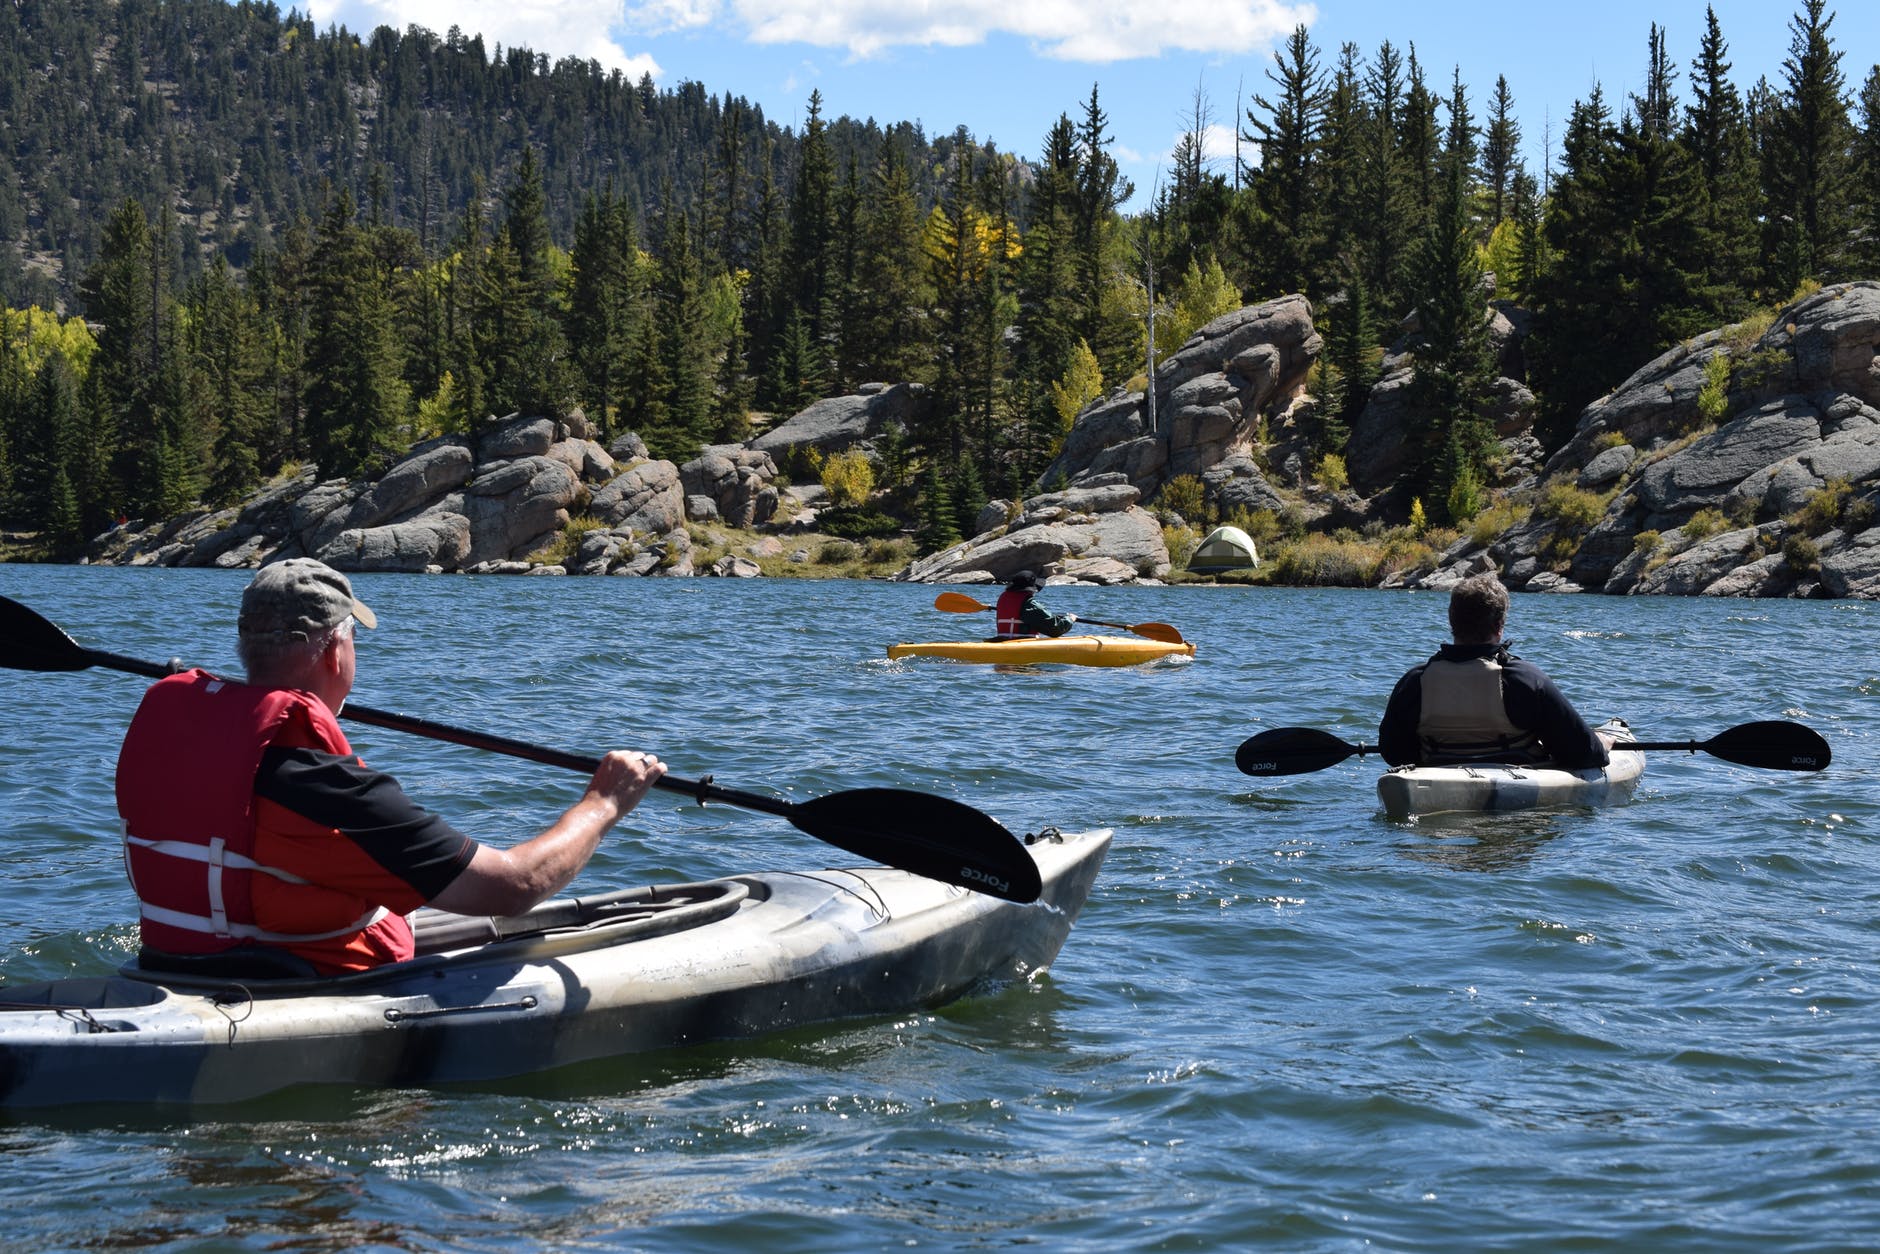 Is Kayaking Better Cardio or Strength?